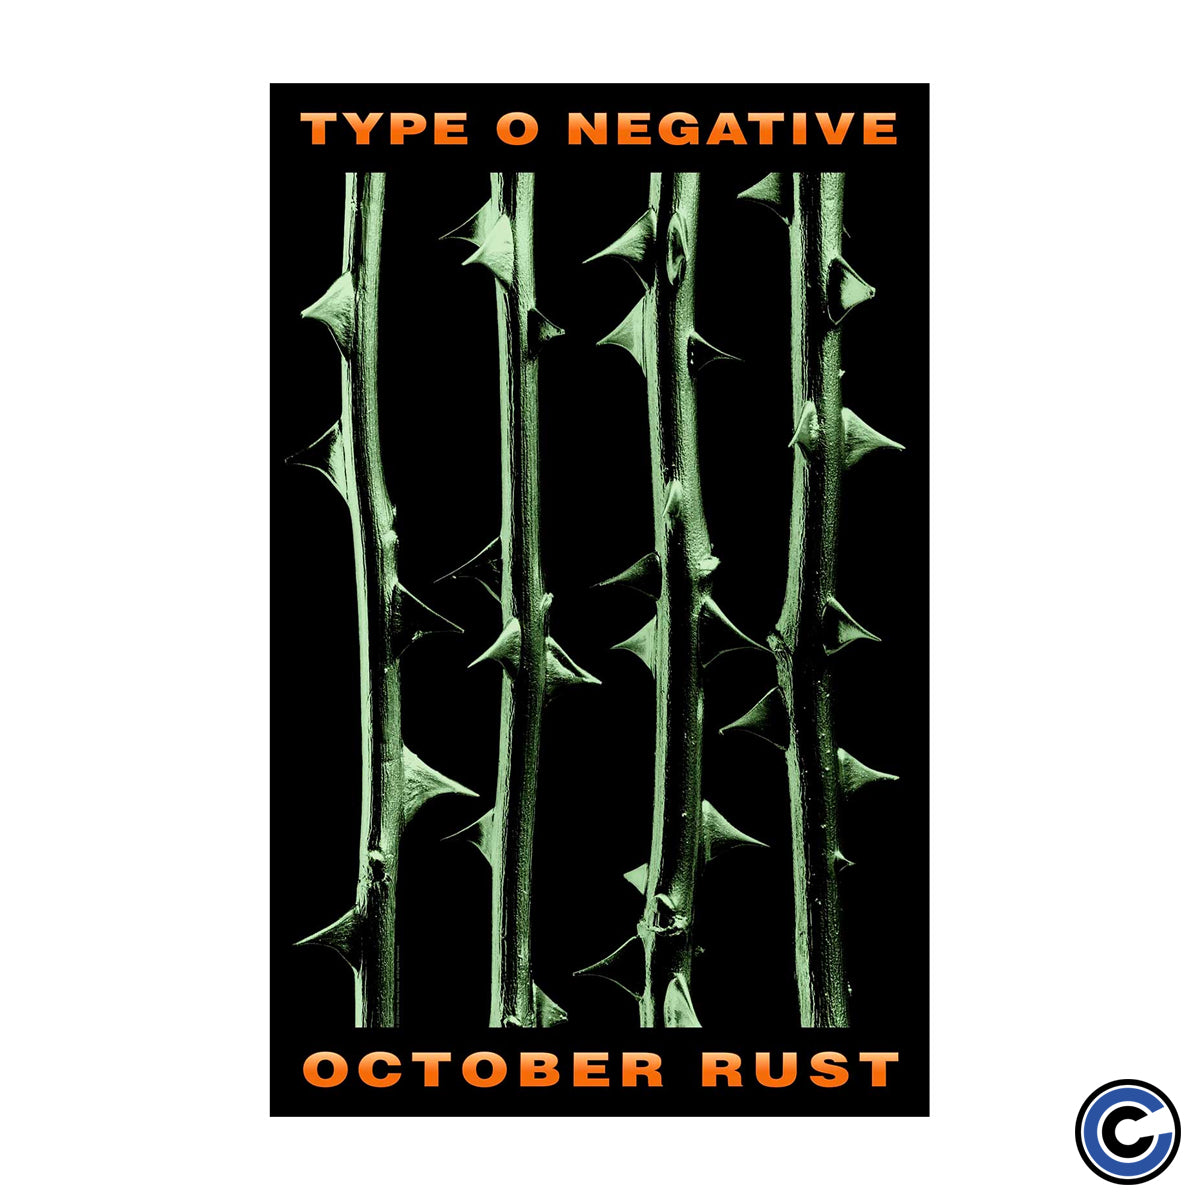 Type O Negative "October Rust" Poster